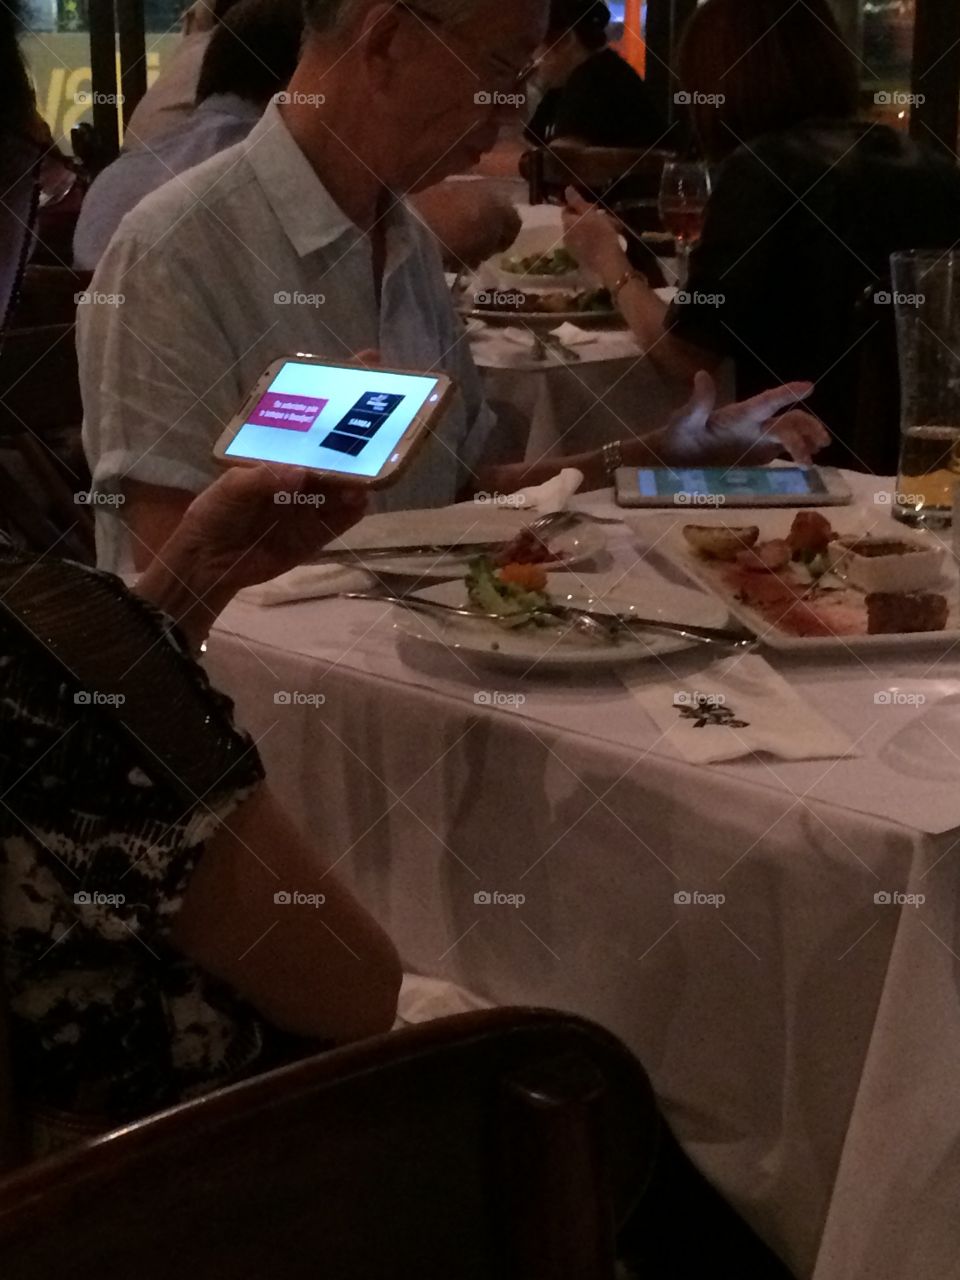 Funny things people do especially old married couples out for dinner!